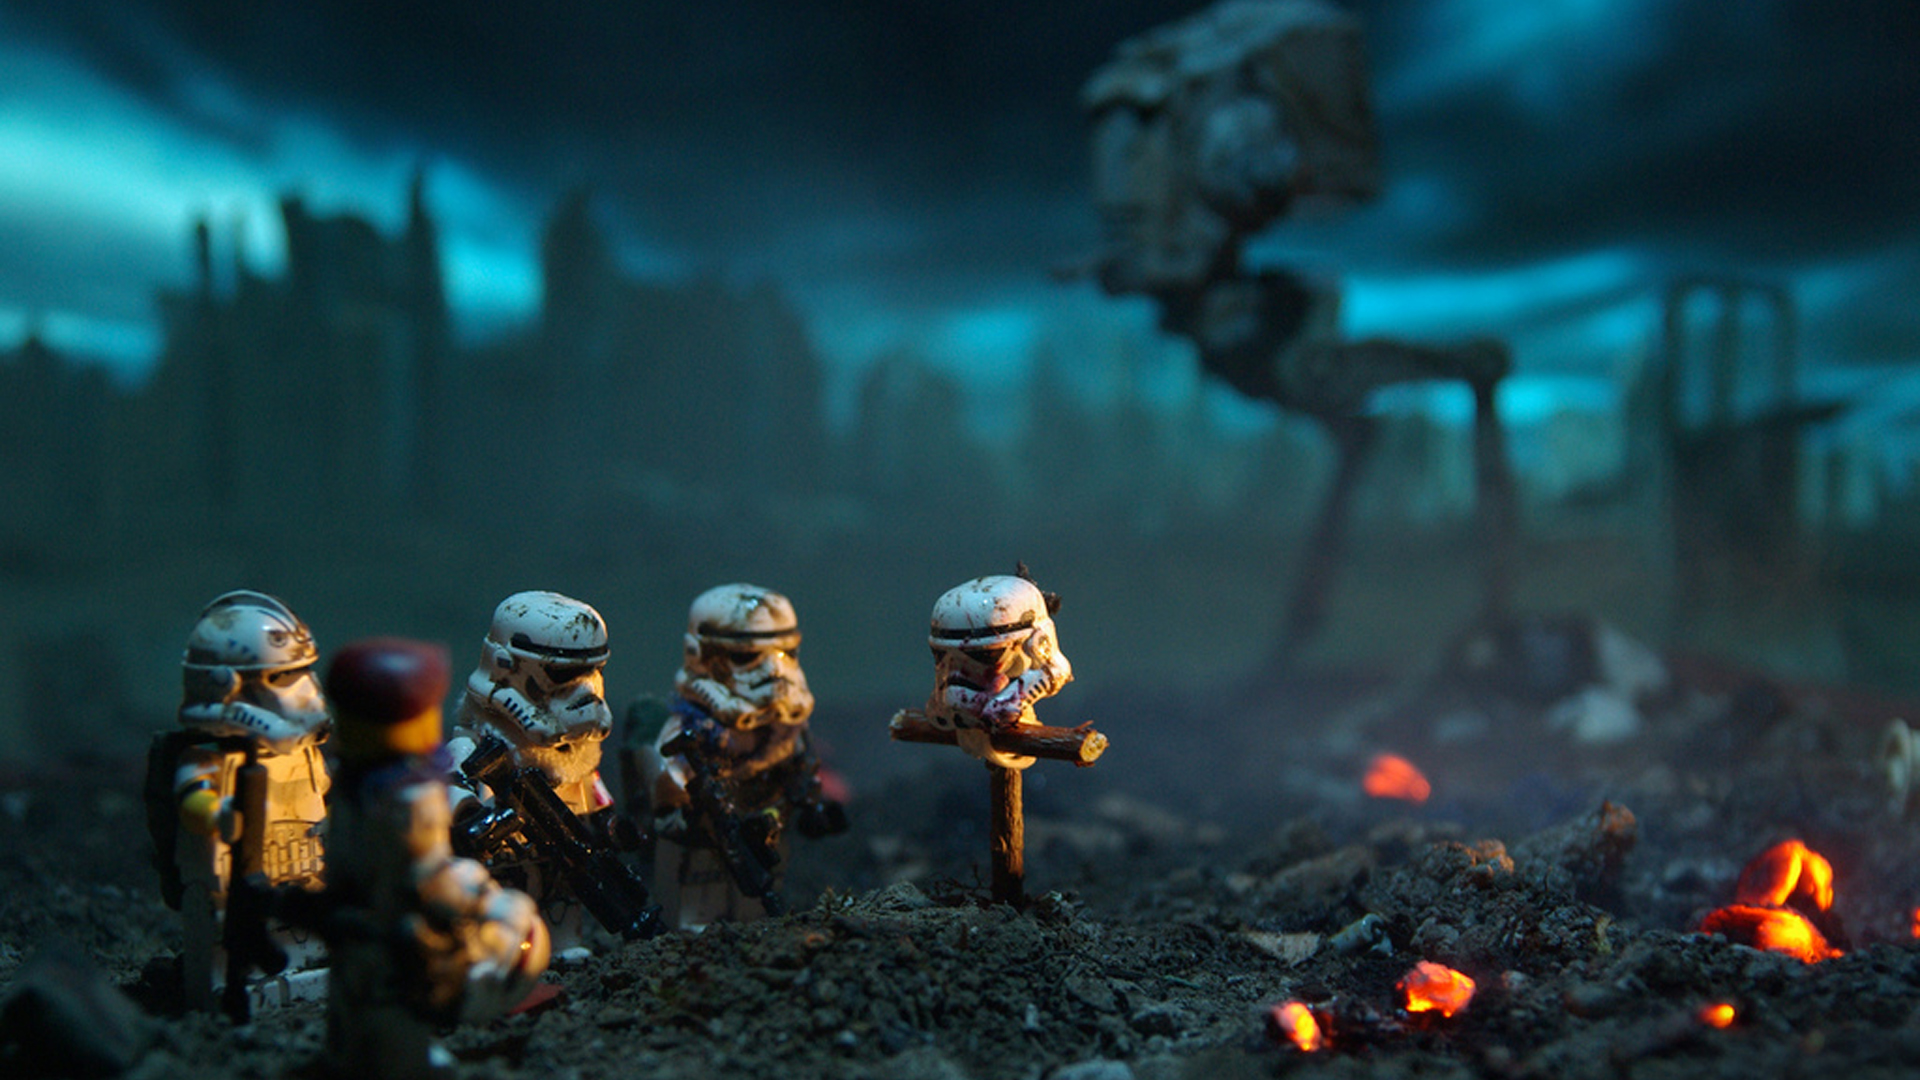 Lego Star Wars Stormtroopers Wallpapers HD Wallpapers